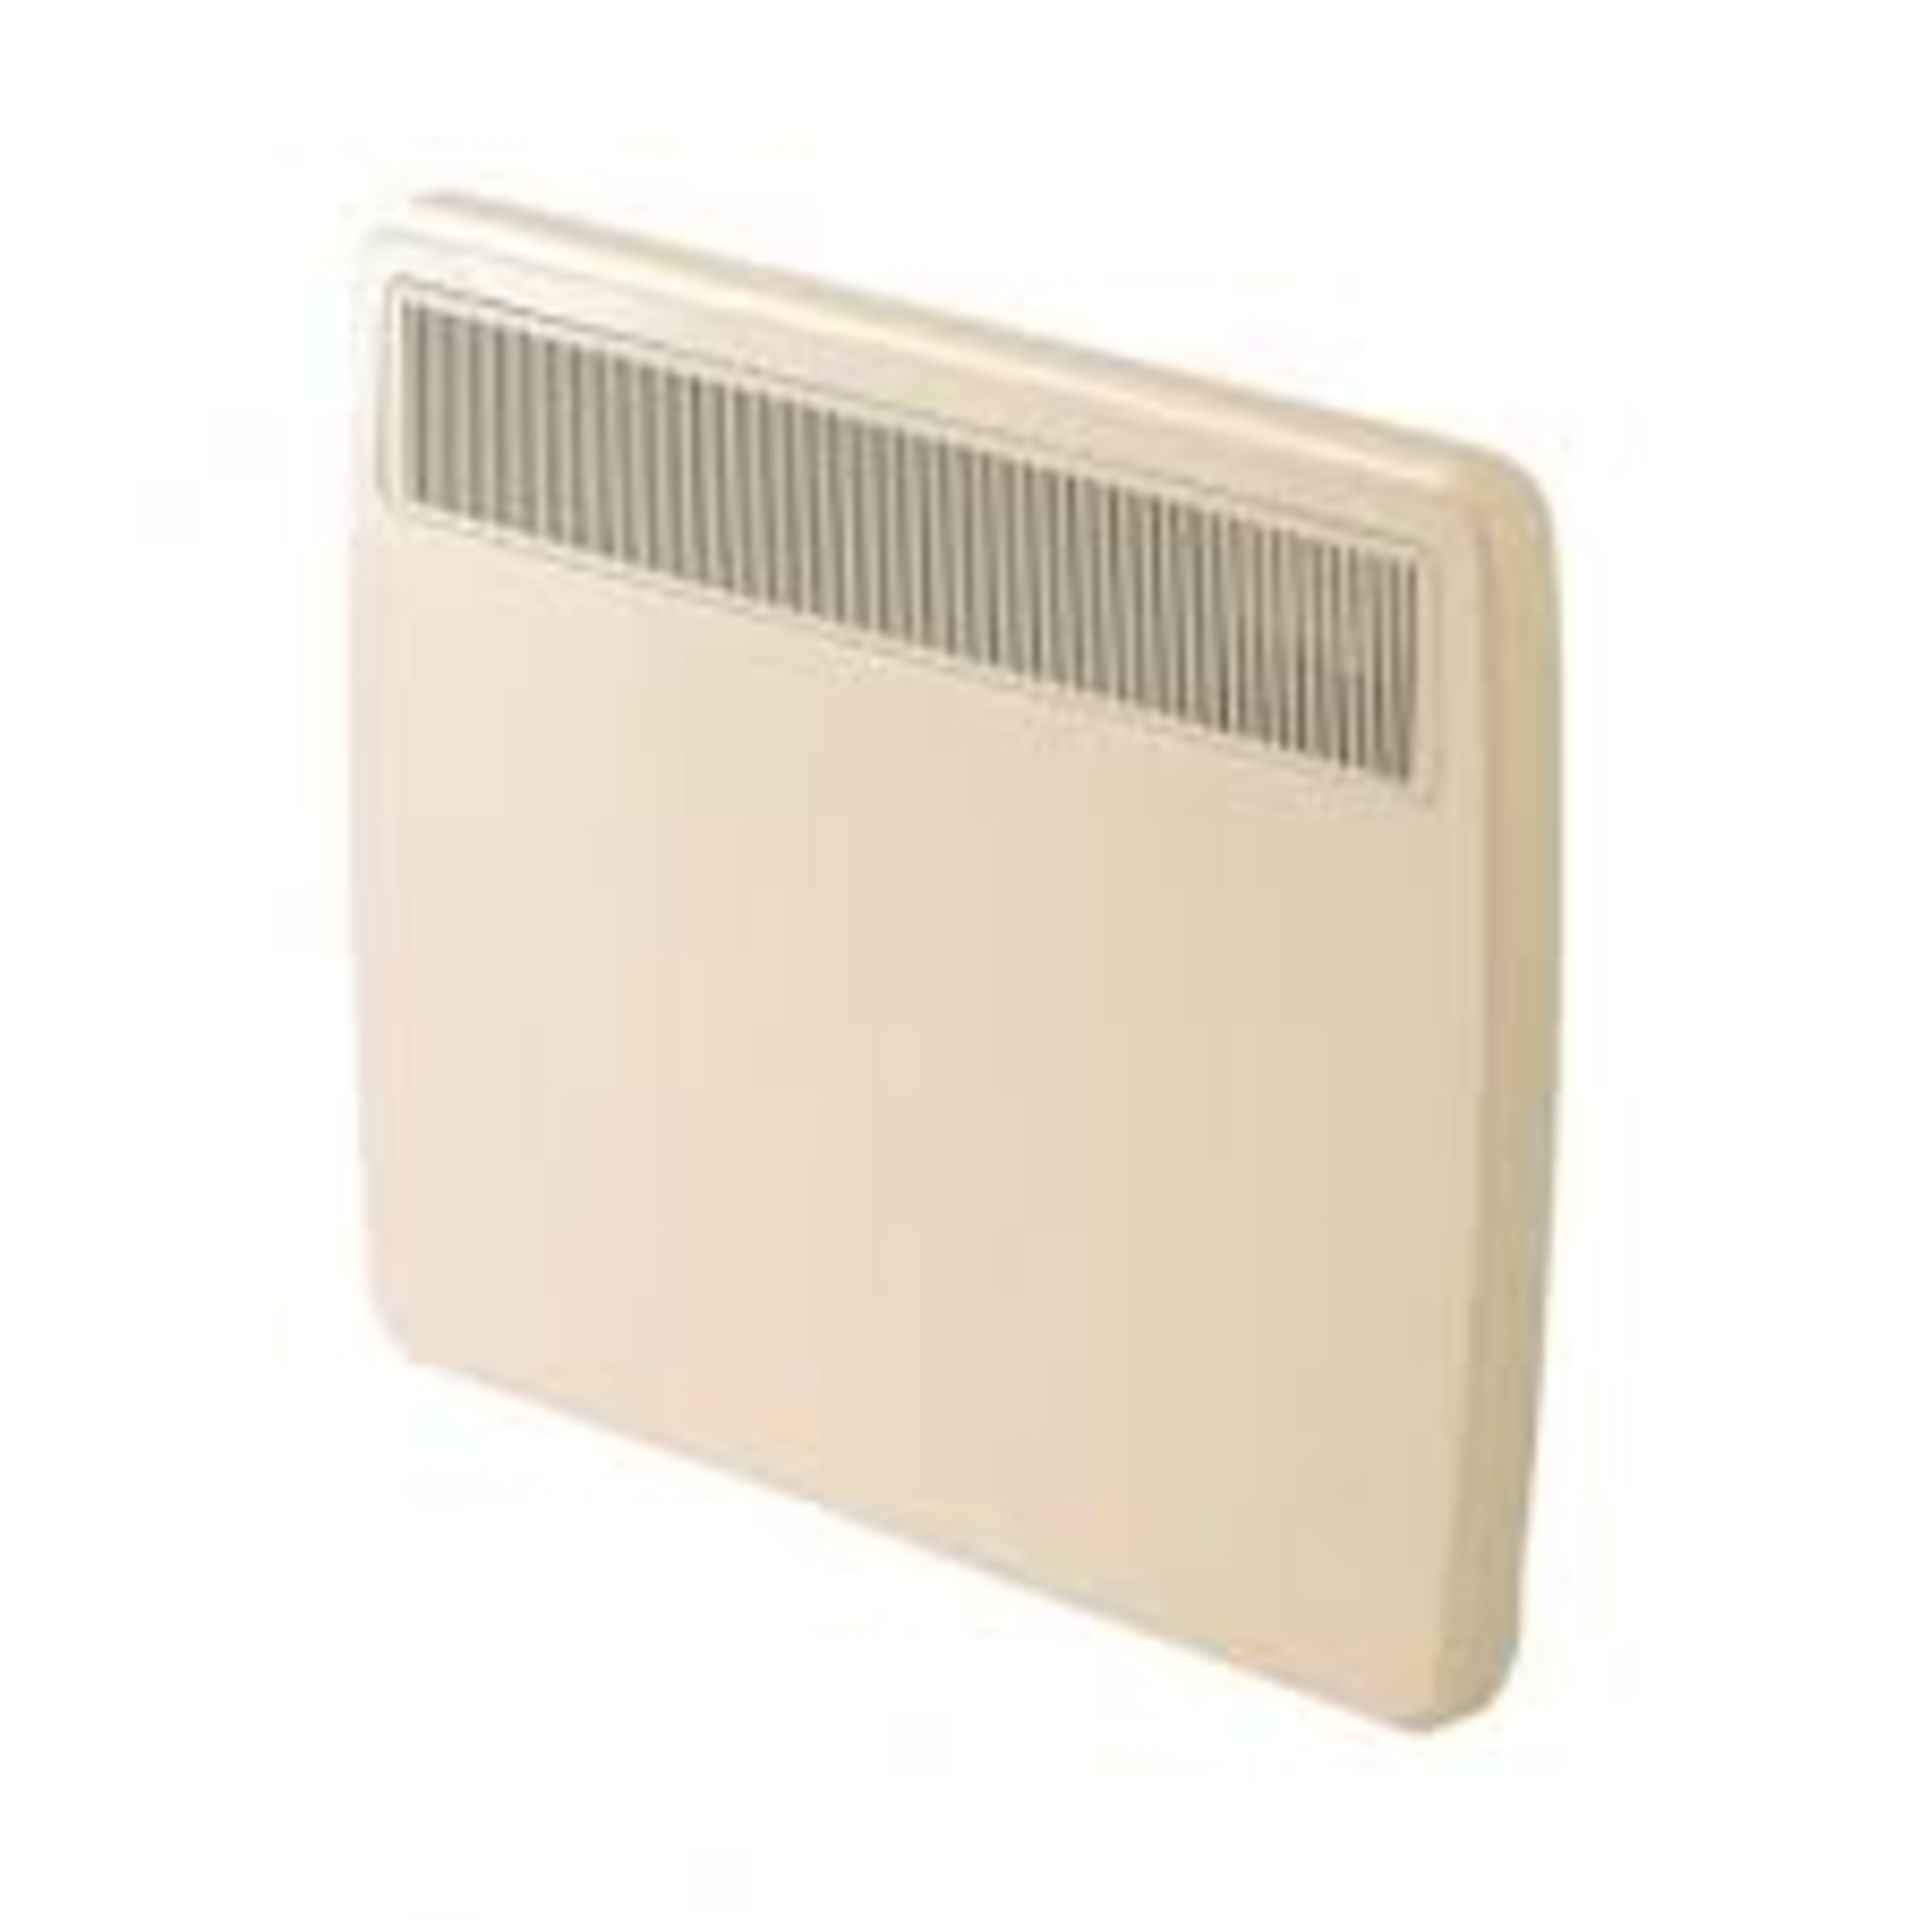 NEW & BOXED SUNHOUSE SPHN150 1.5KW PANEL HEATER. RRP £199.85. (ROW17). Stylish willow white design